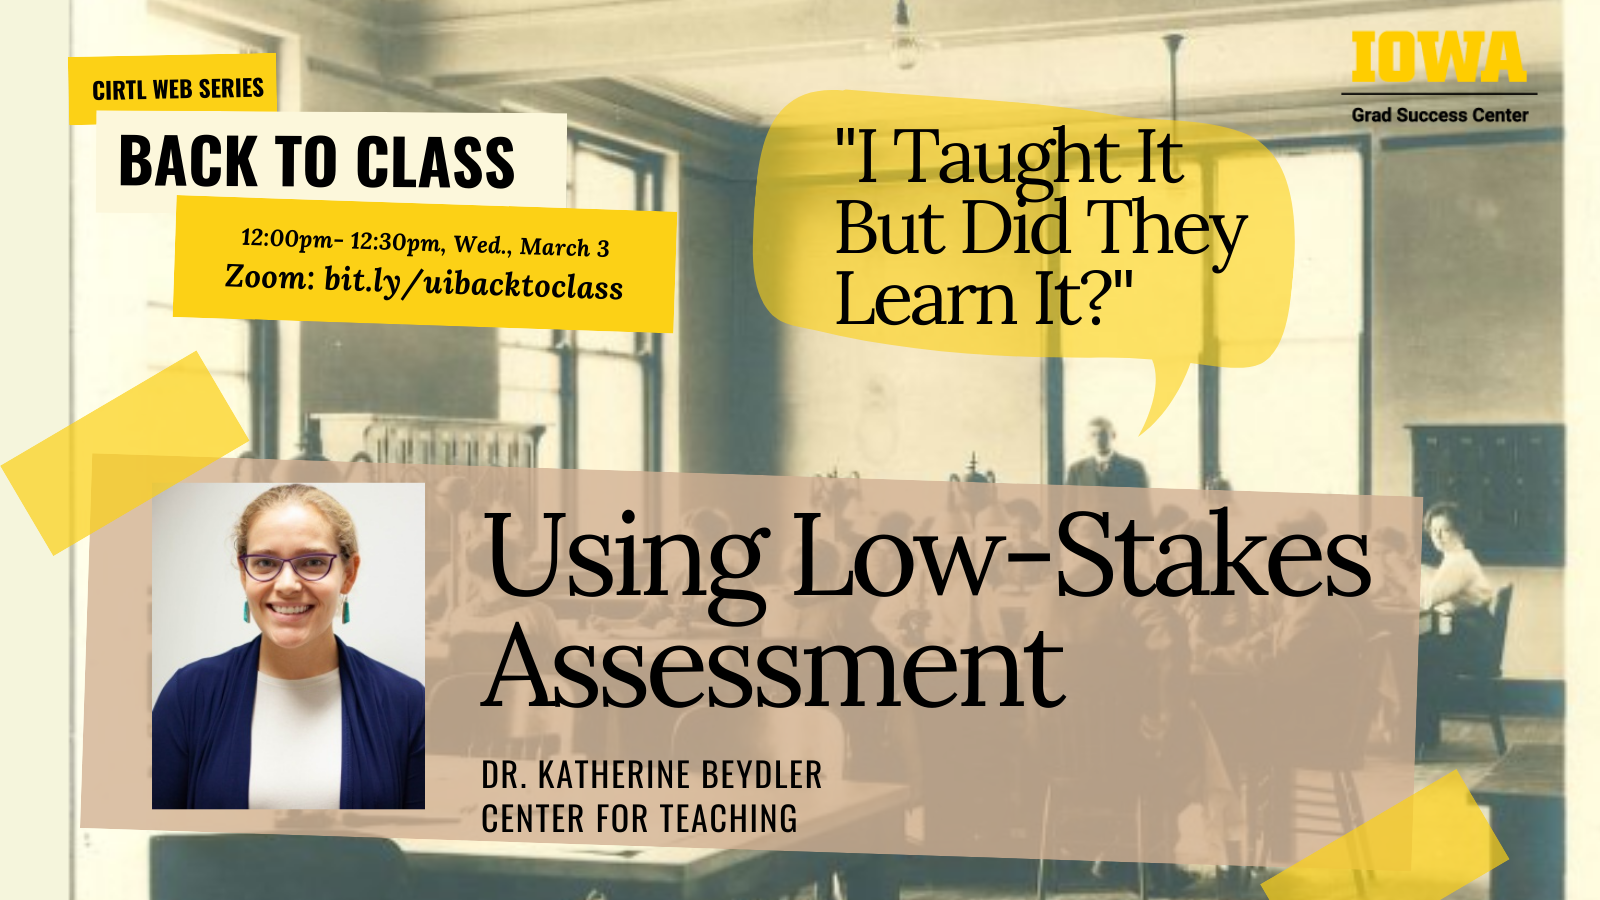 I Taught It But Did They Learn It: Using Low Stakes Assessment (CIRTL Back to Class Series)  promotional image